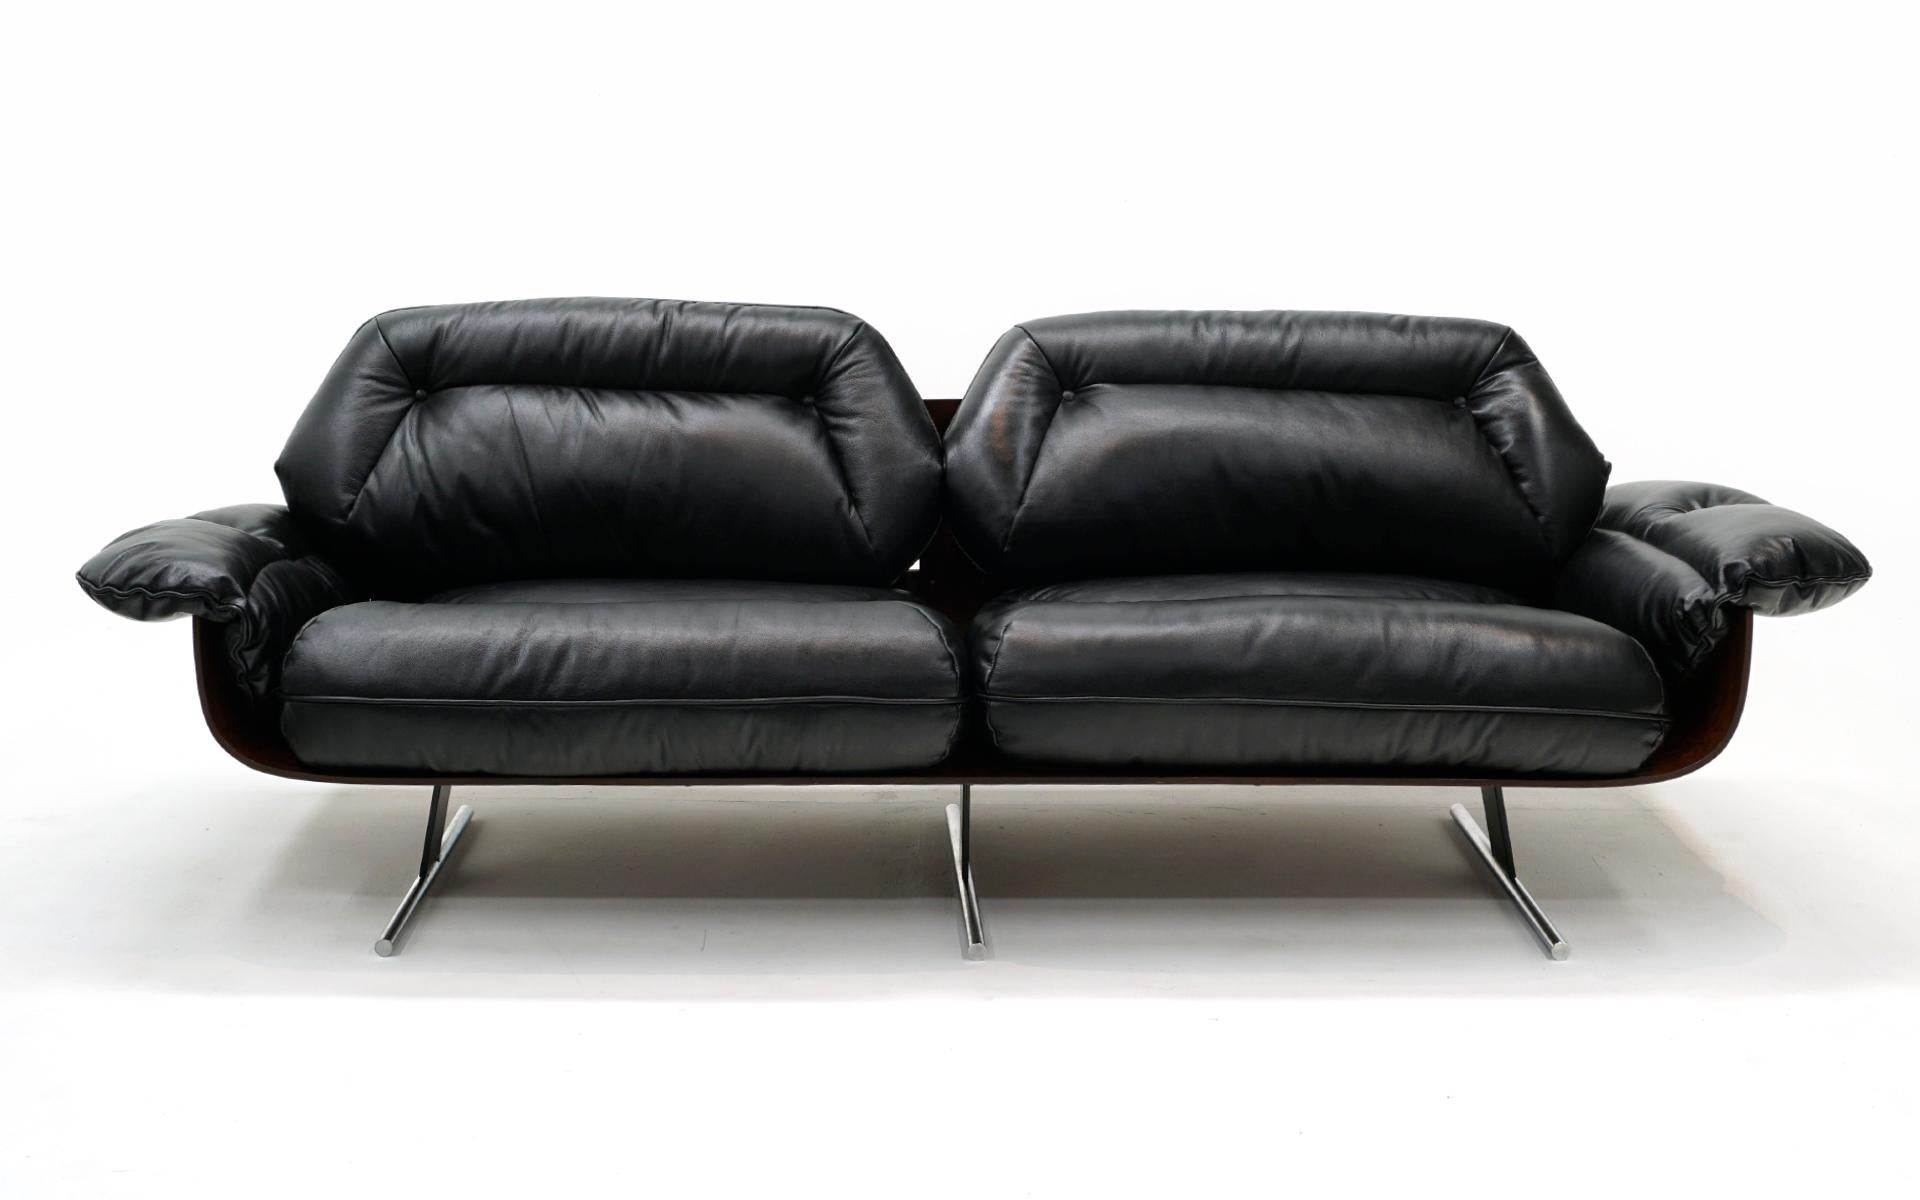 Mid-Century Modern Jorge Zalszupin Sofa in Black Leather and Brazilian Rosewood. Great Condition. For Sale